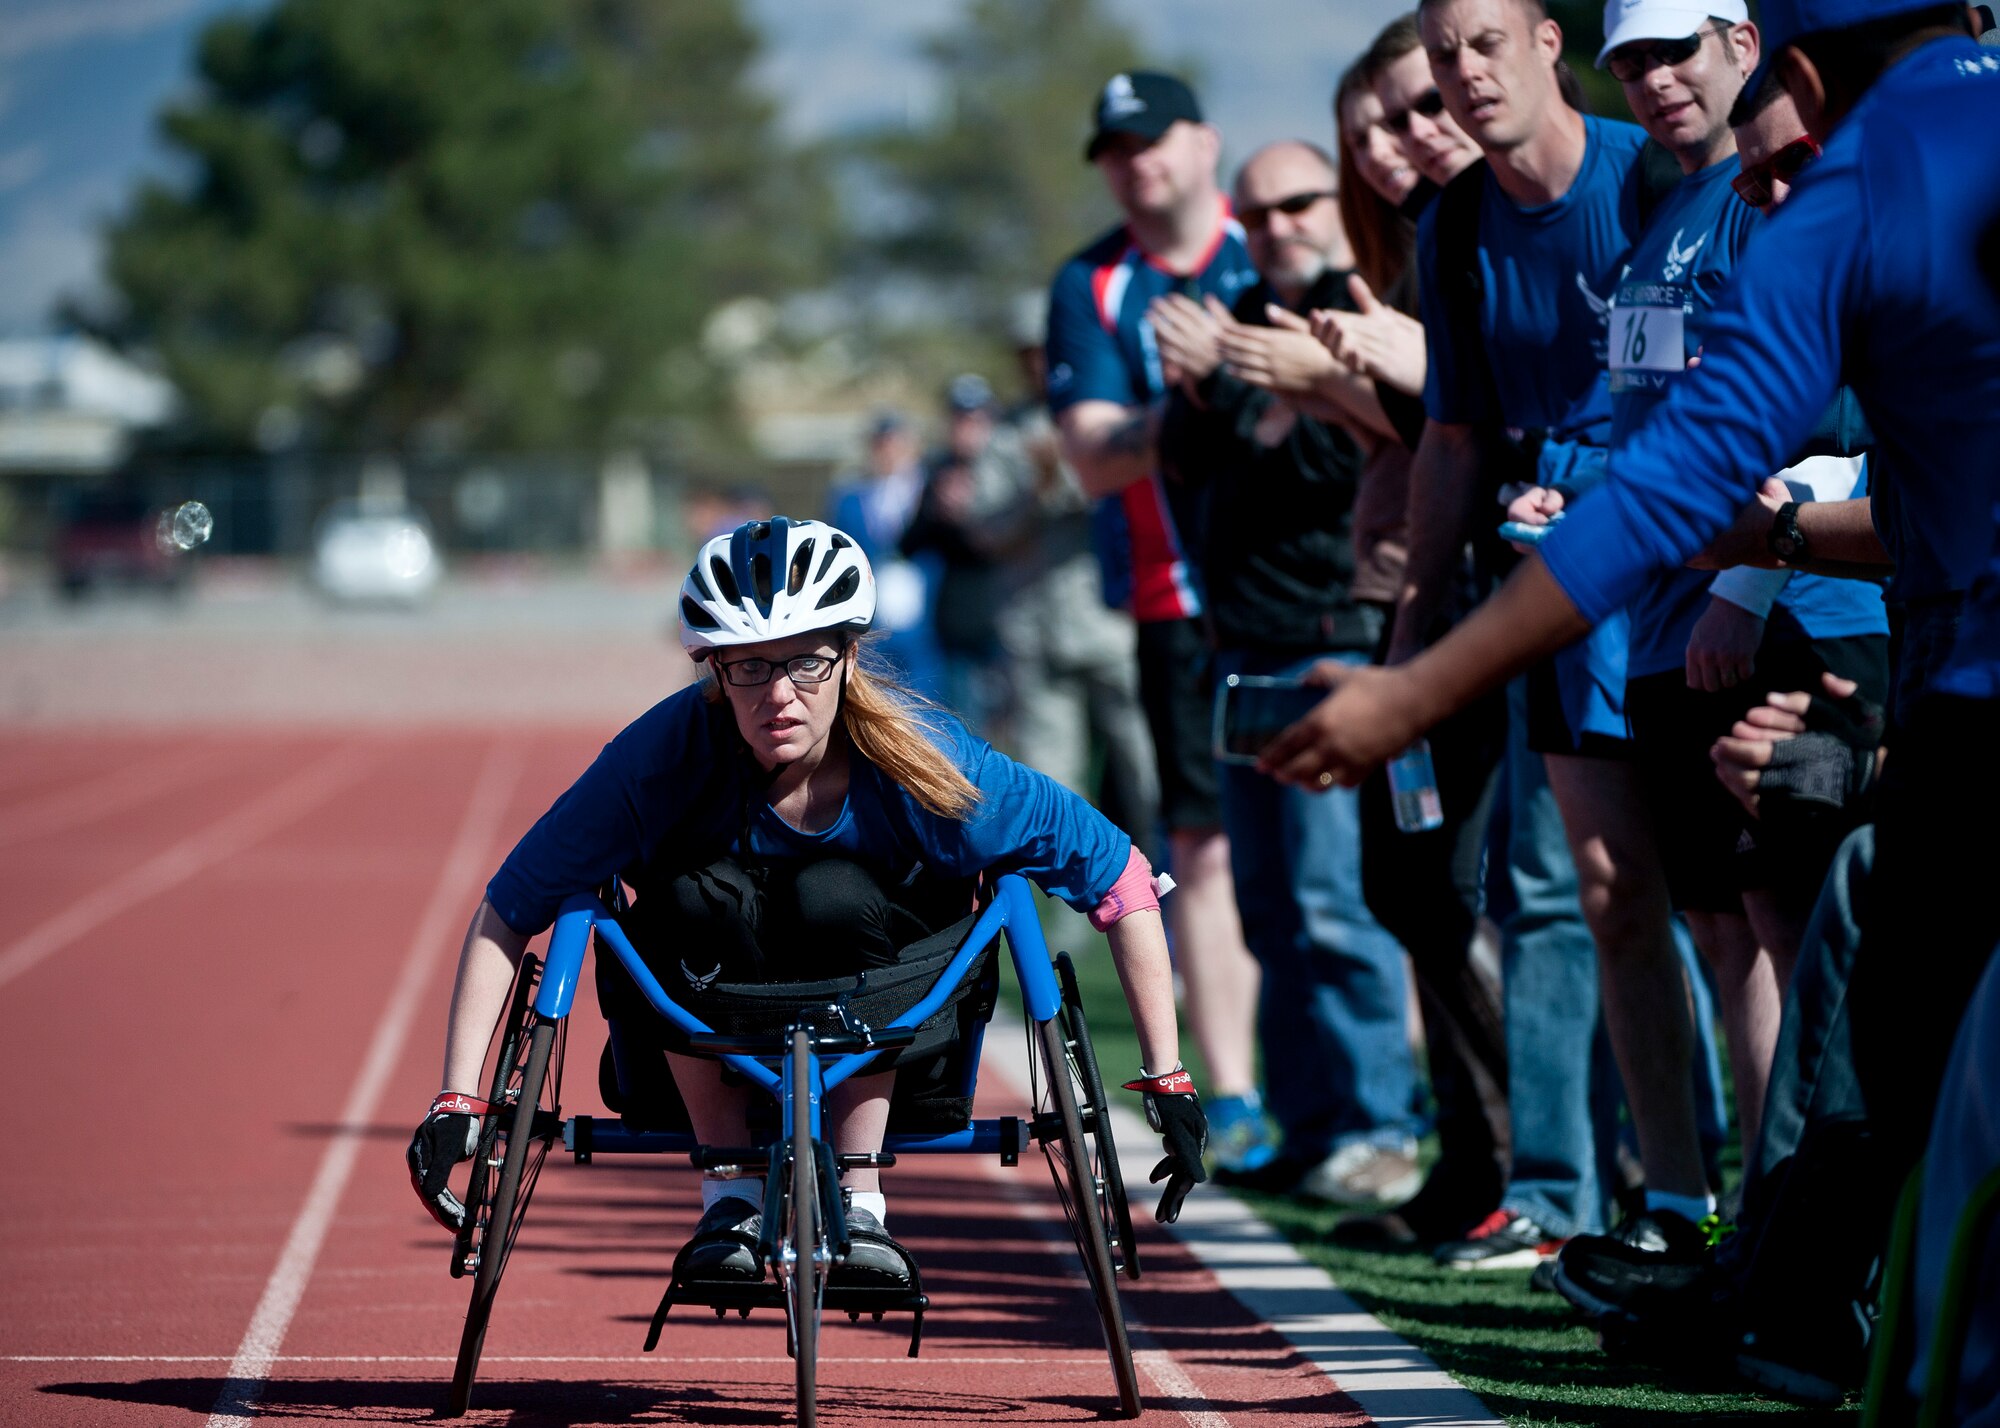 Kristina Morin, 2015 U.S. Air Force Trials participant, heads toward the finish line of a 1500-meter race at Nellis Air Force Base, Nev., March 3, 2015. During the trials, participants will be competing for a spot on the 2015 U.S. Air Force Wounded Warrior Team, which will represent the Air Force at adaptive sports events throughout the year.  (U.S. Air Force photo by Staff Sgt. Siuta B. Ika)